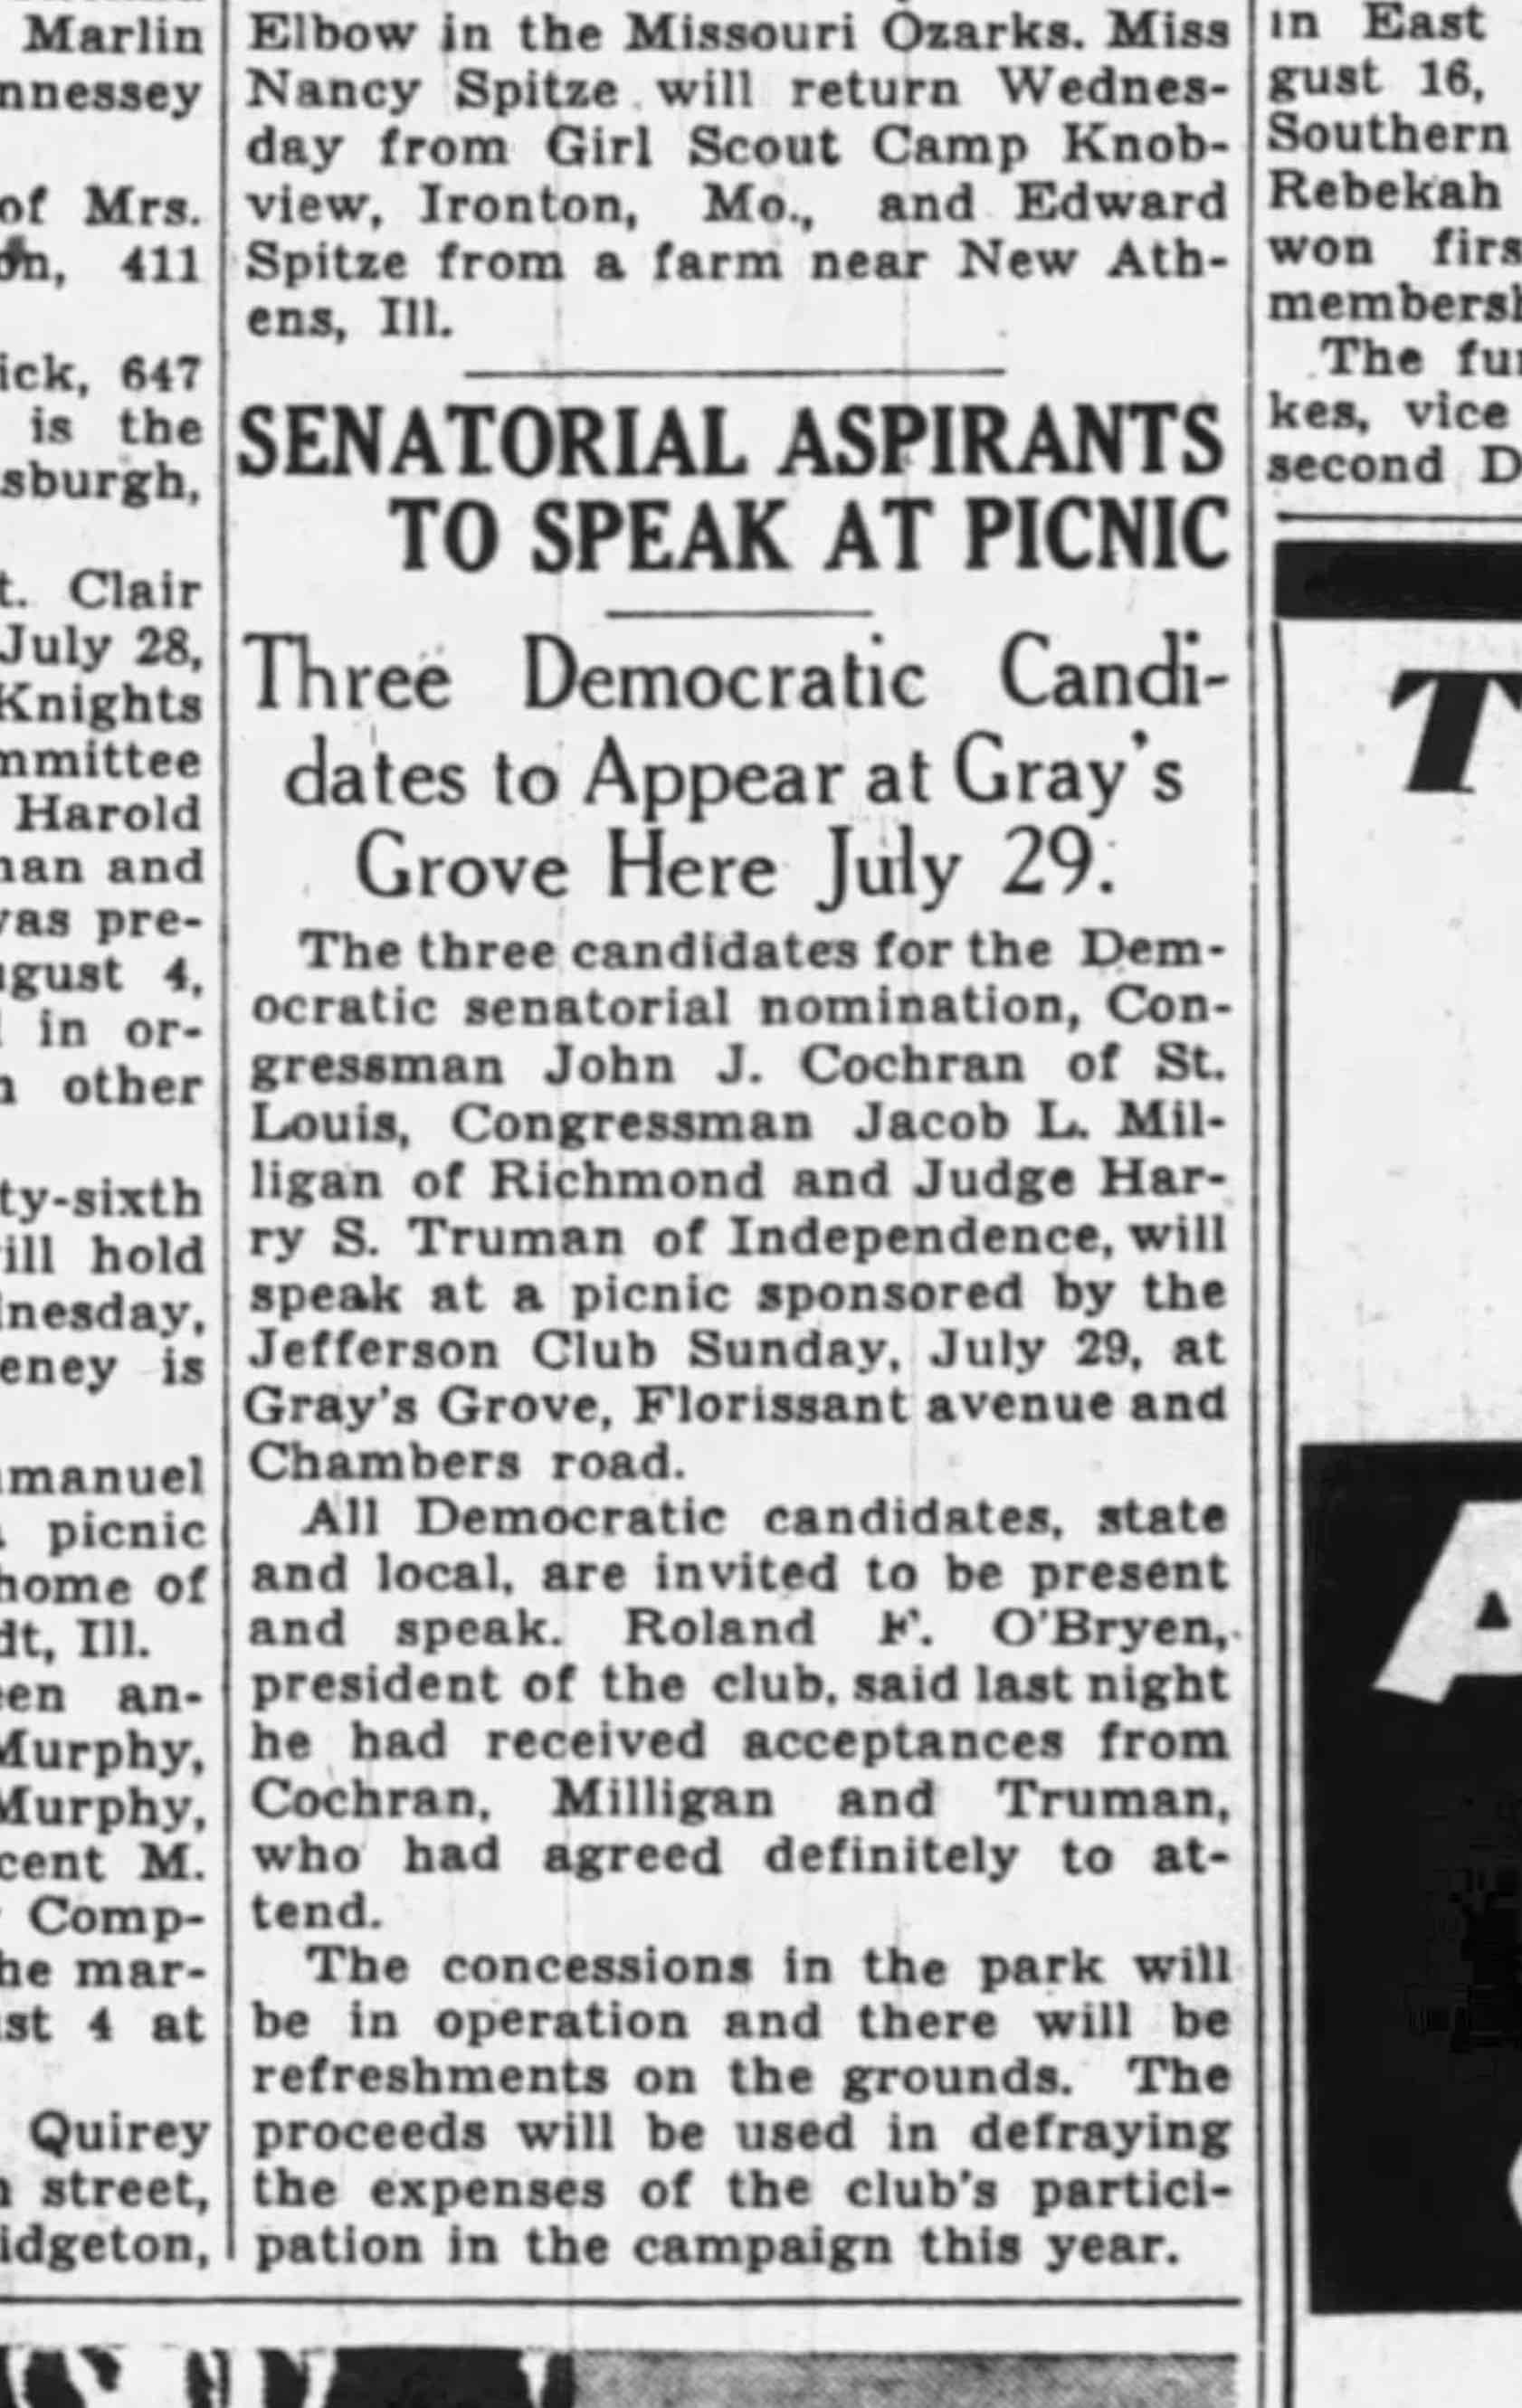 Campaign Speeches at Gray’s Grove 1934